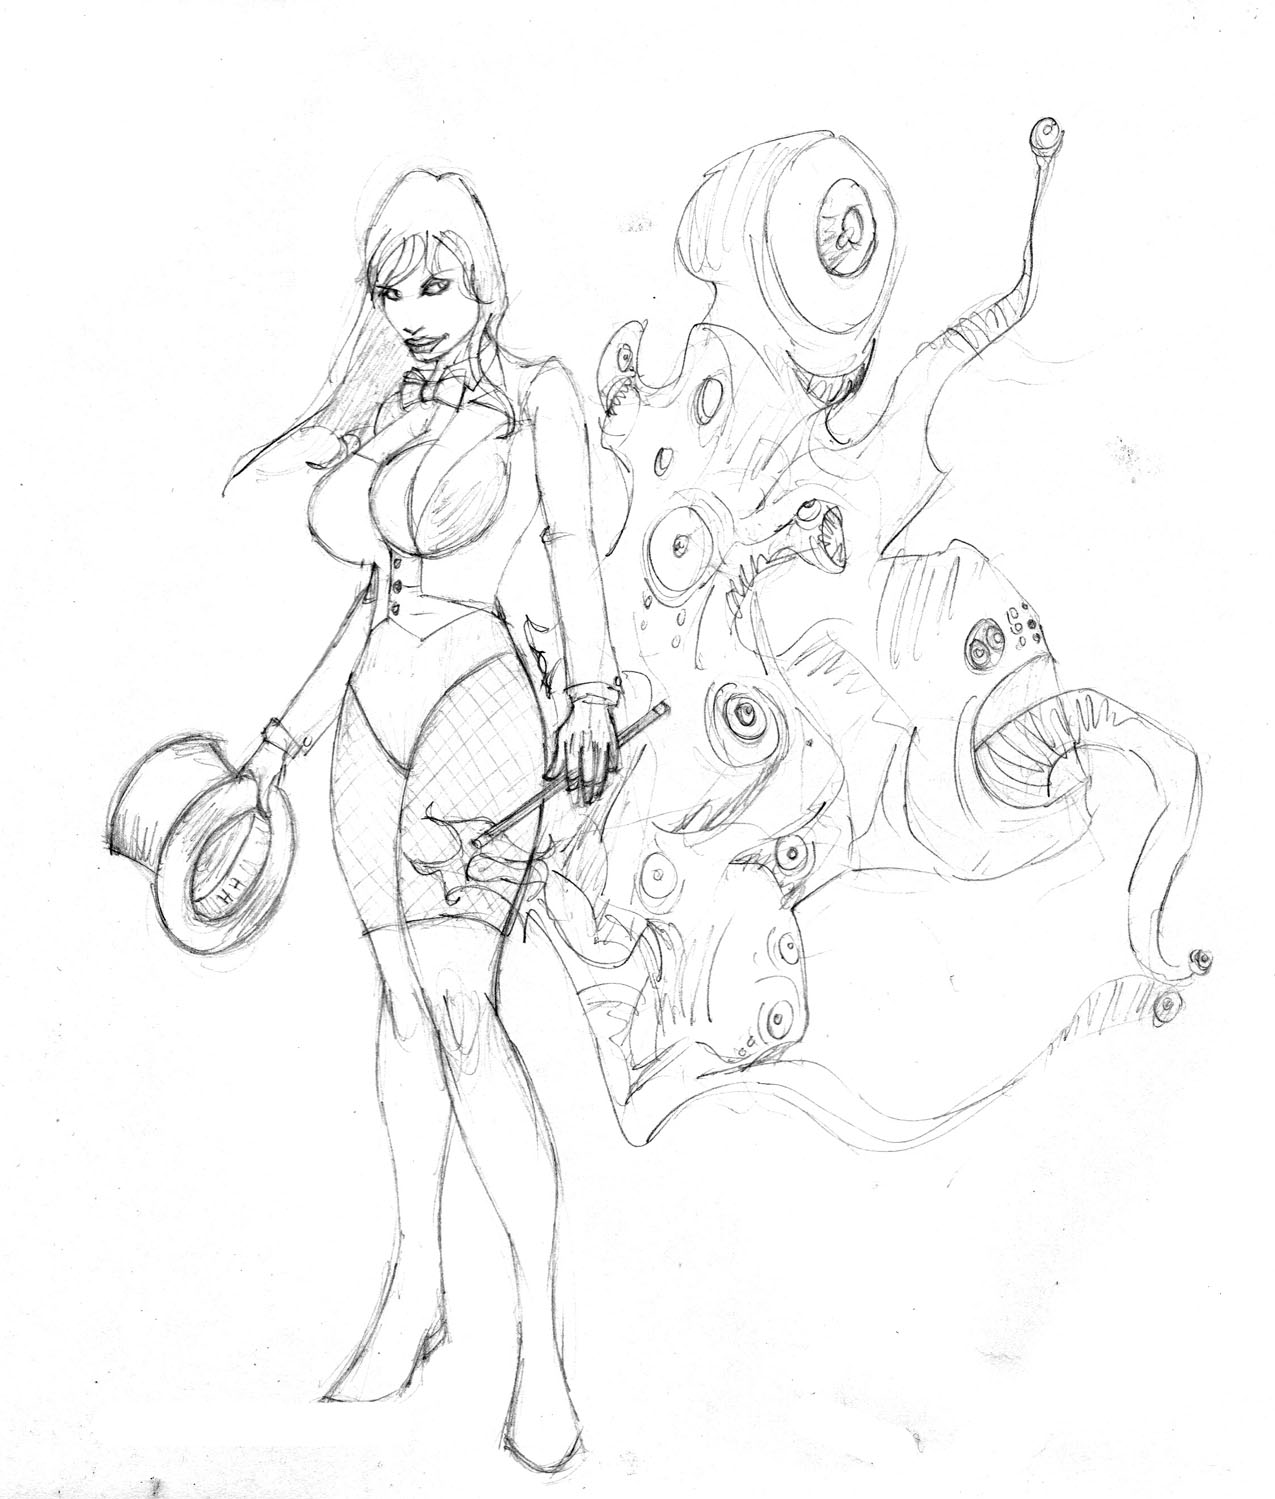 zatanna casts a spell? by Selkirk